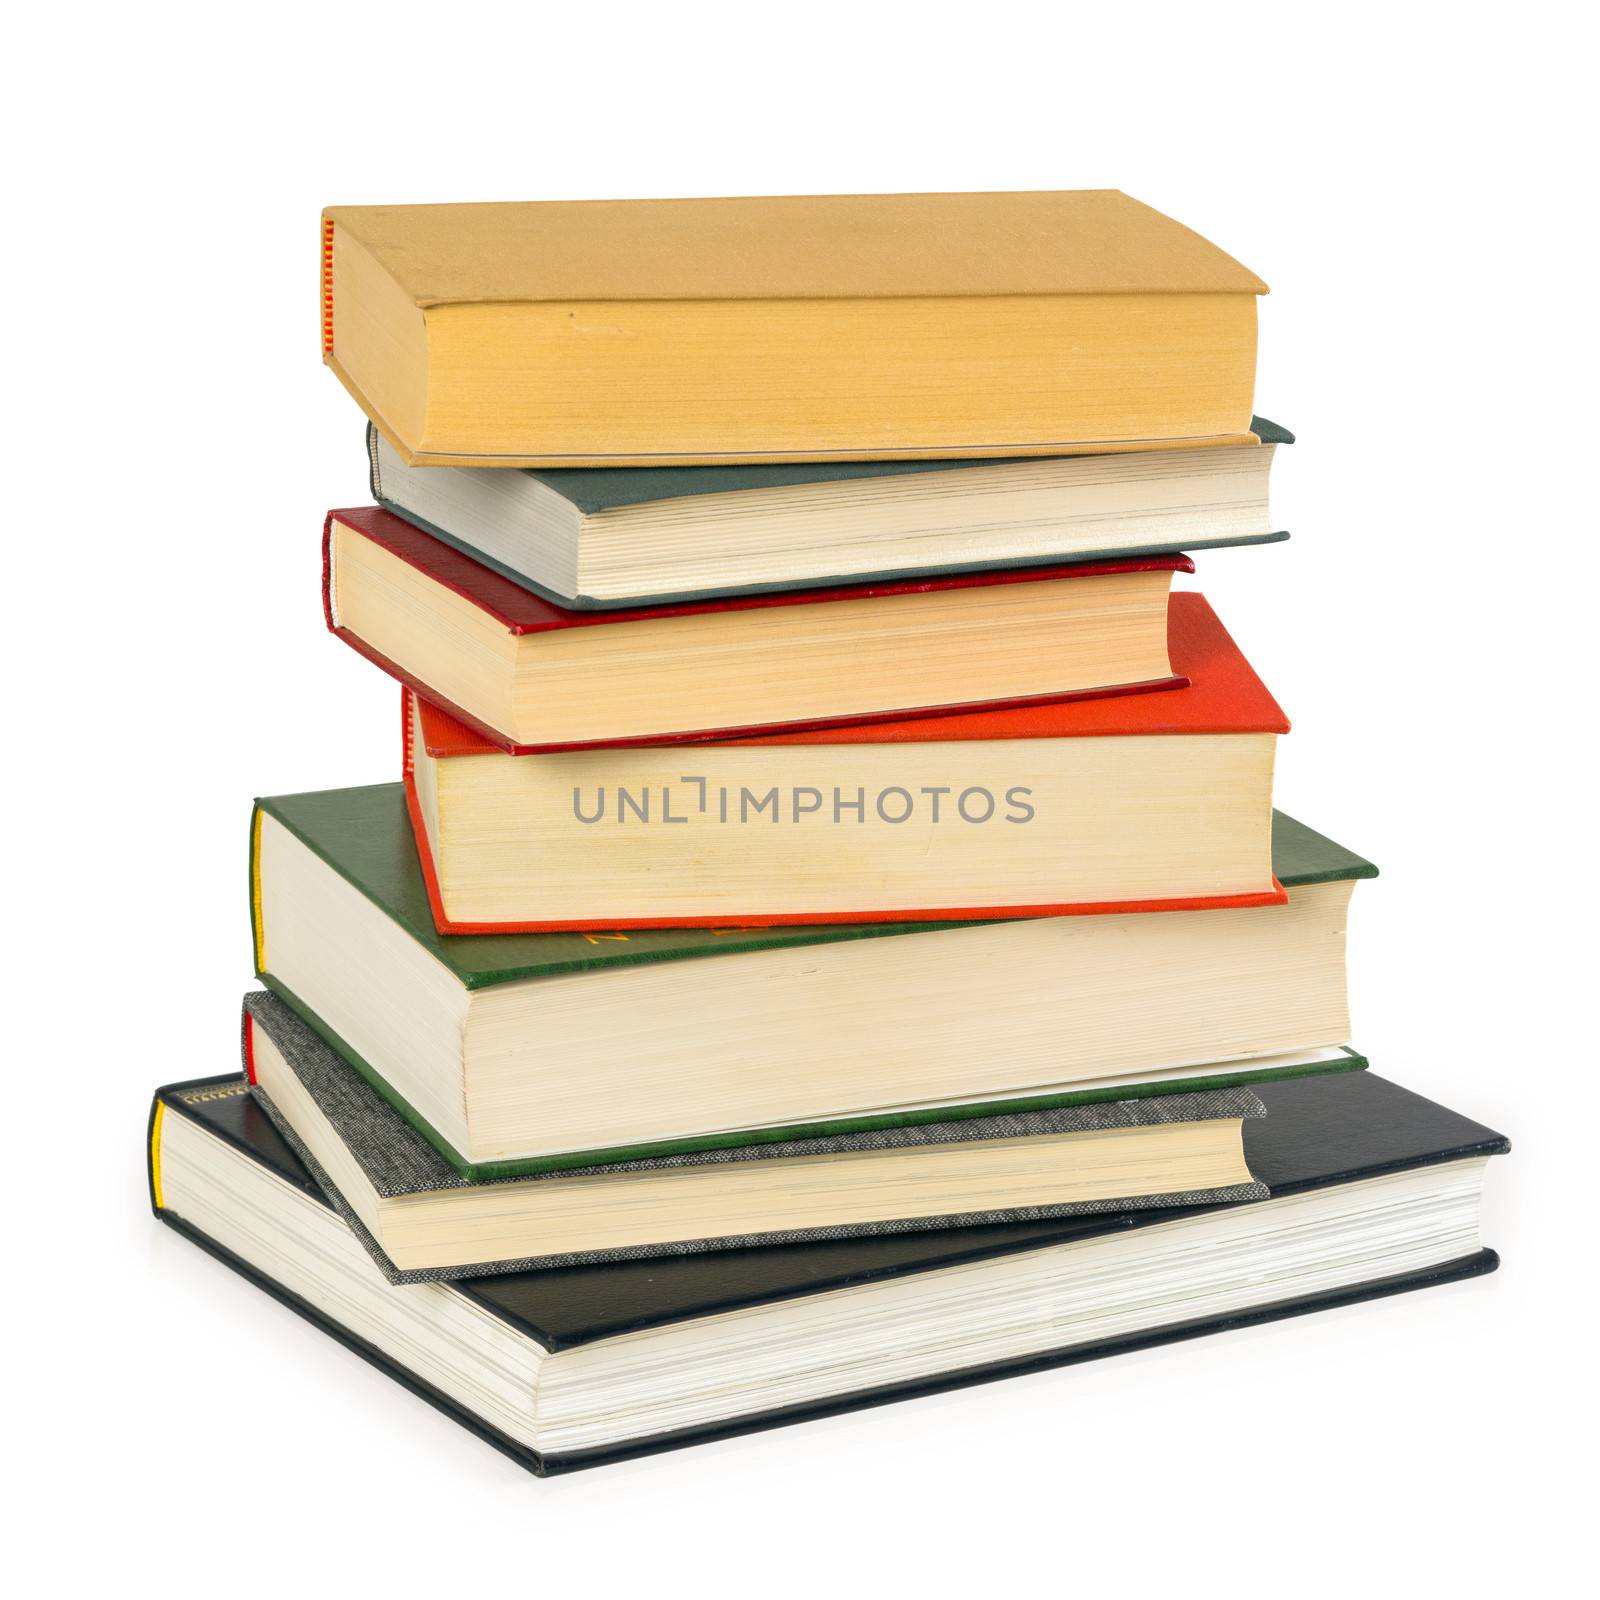 Photo of a small pile of old books isolated on white background